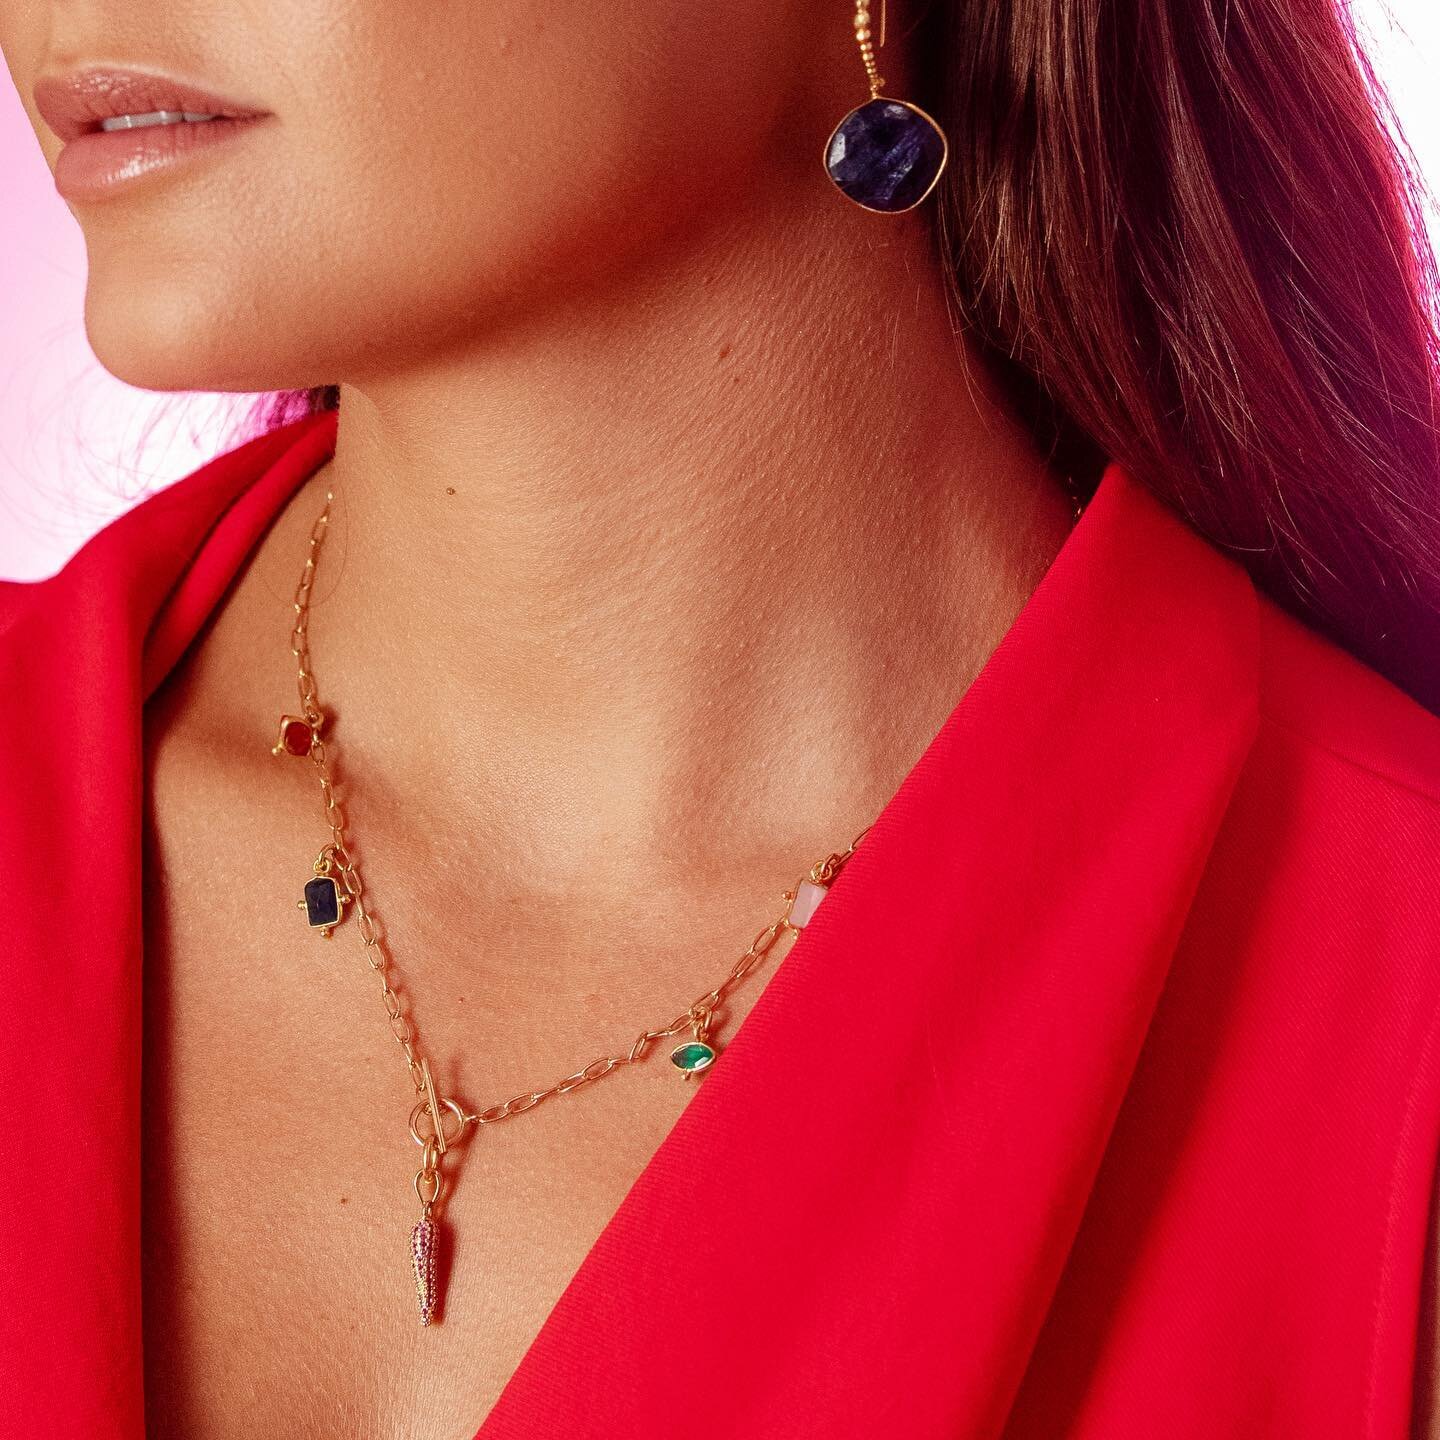 ☀️The Gold Horn Charm Necklace is perfect for everyday, shed the layers and add some jewellery, the warmer weather has arrived!!
.
.
.
#charmjewellery #jewellery #horn #charms #blueagate #pearl #redagate #holidays #stylish #travelessentials #travel #